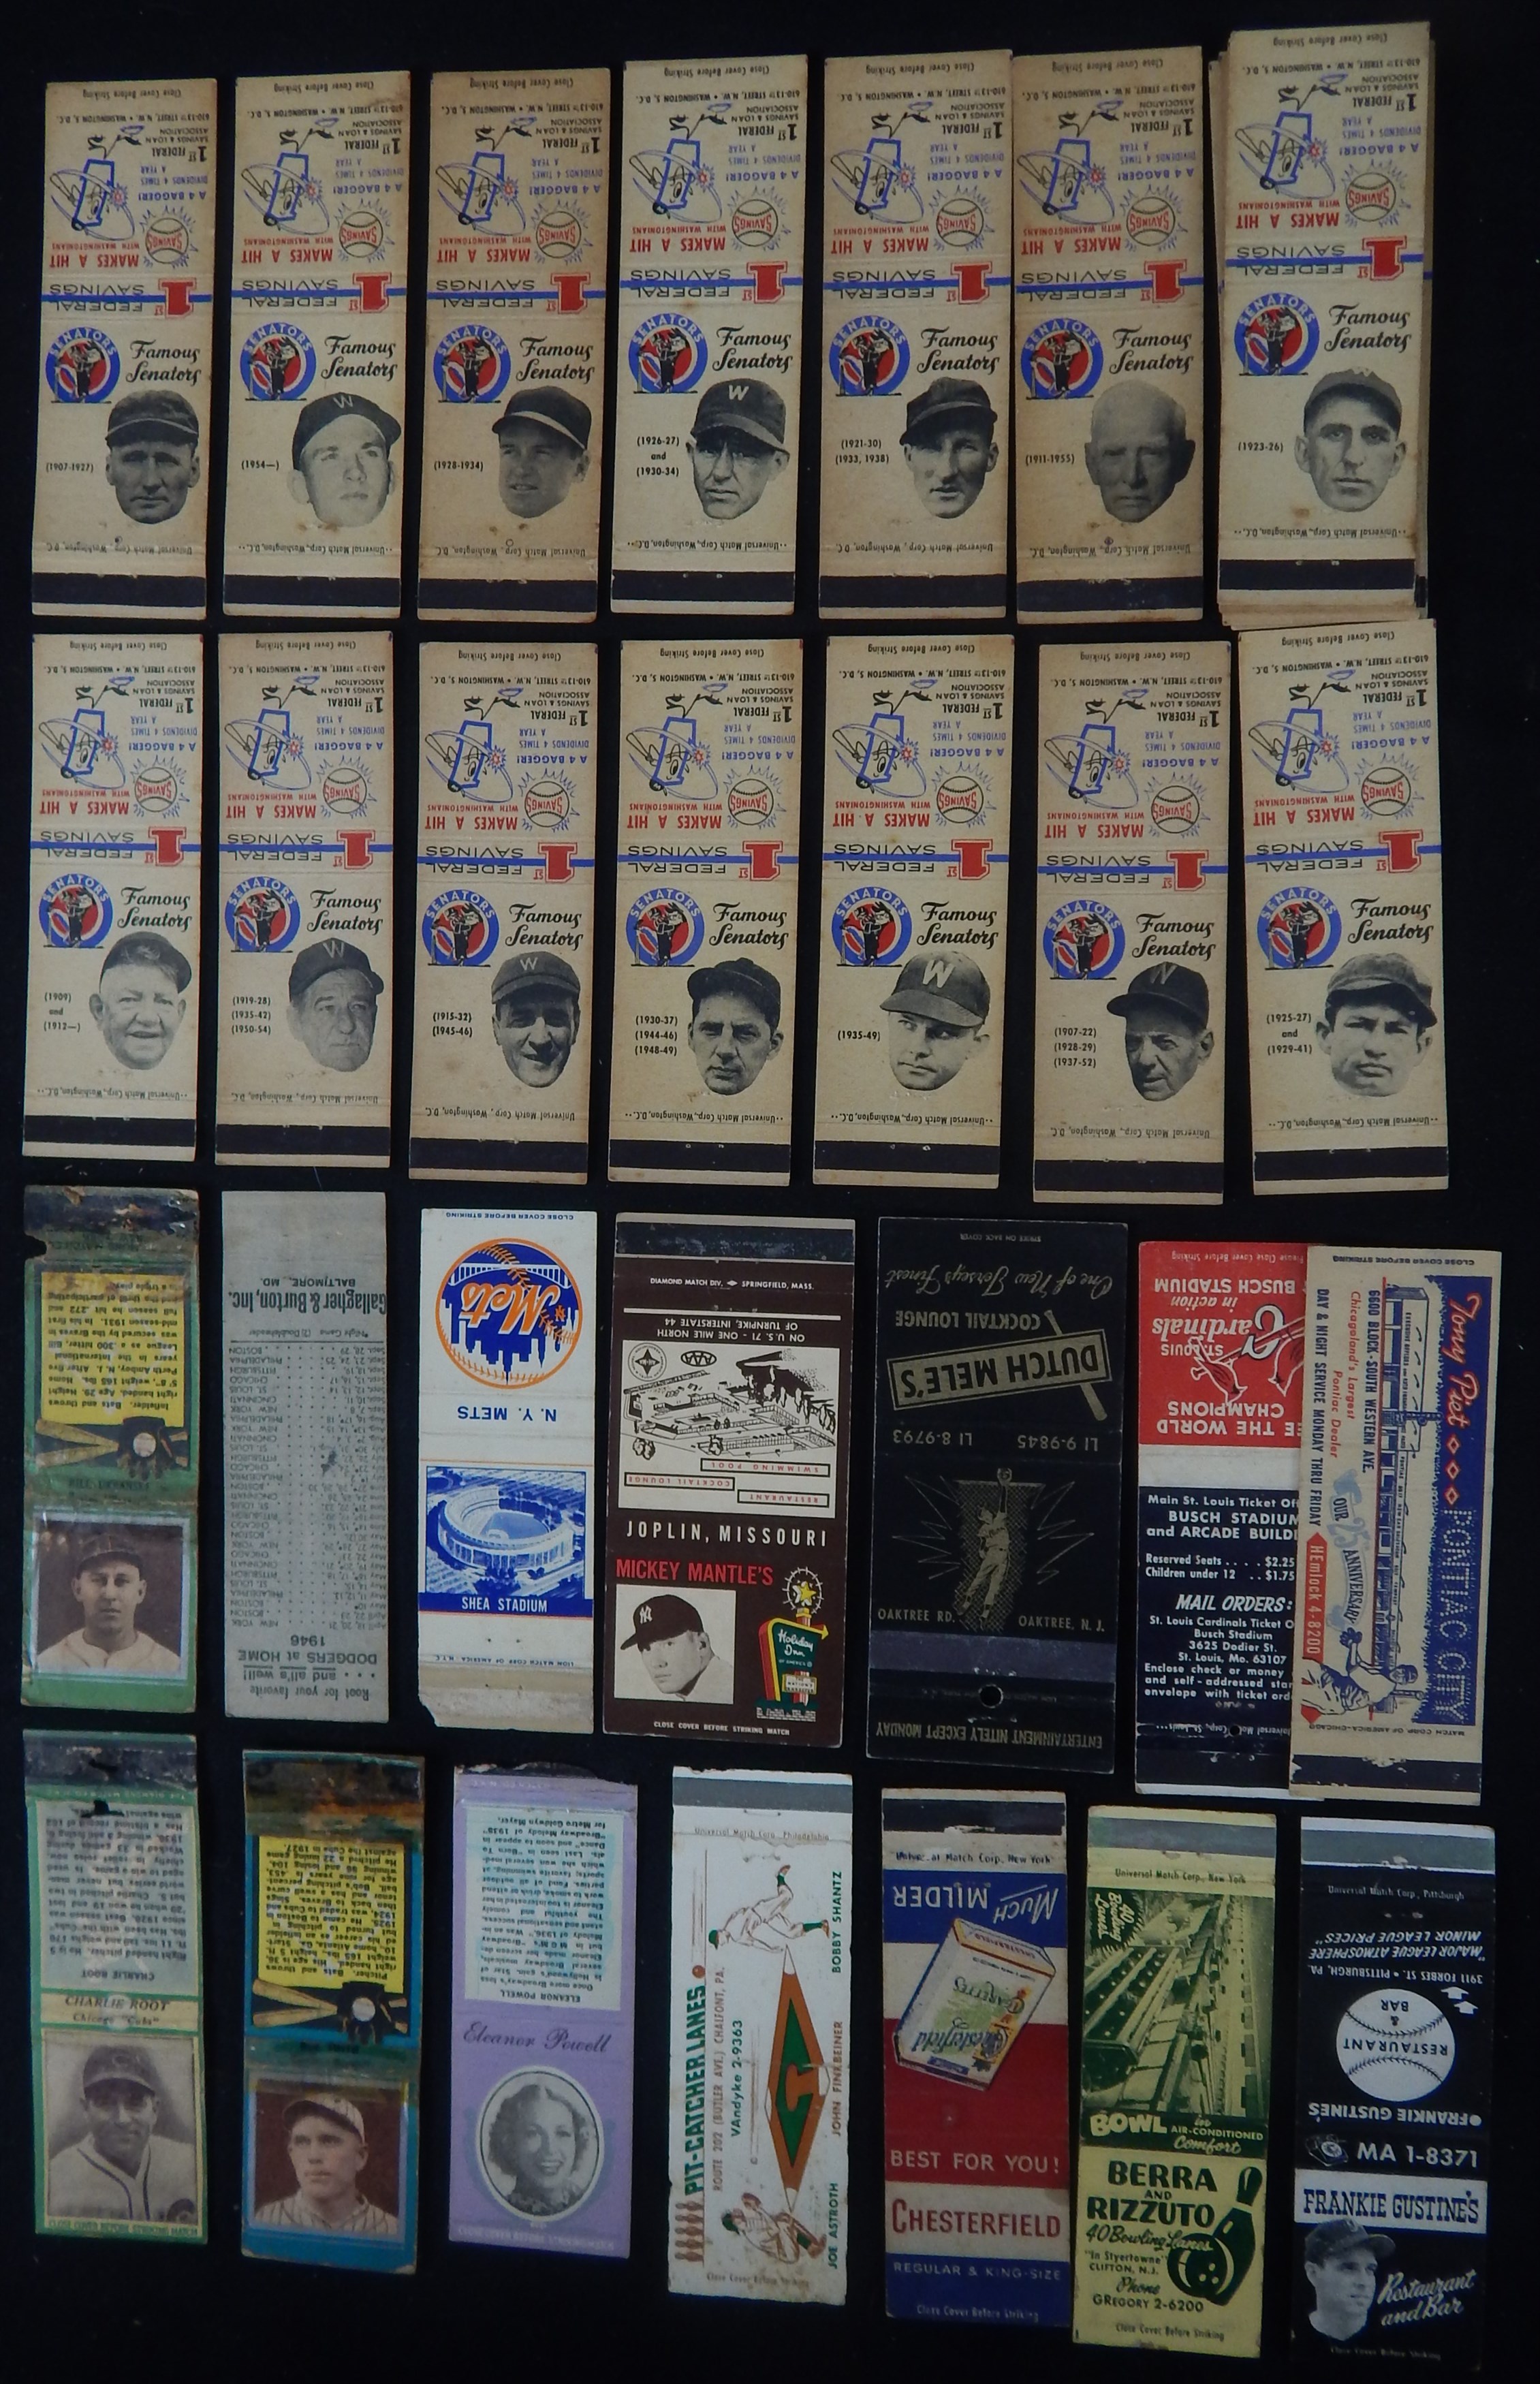 Baseball and Trading Cards - Vintage Baseball Matchbook Collections (35)